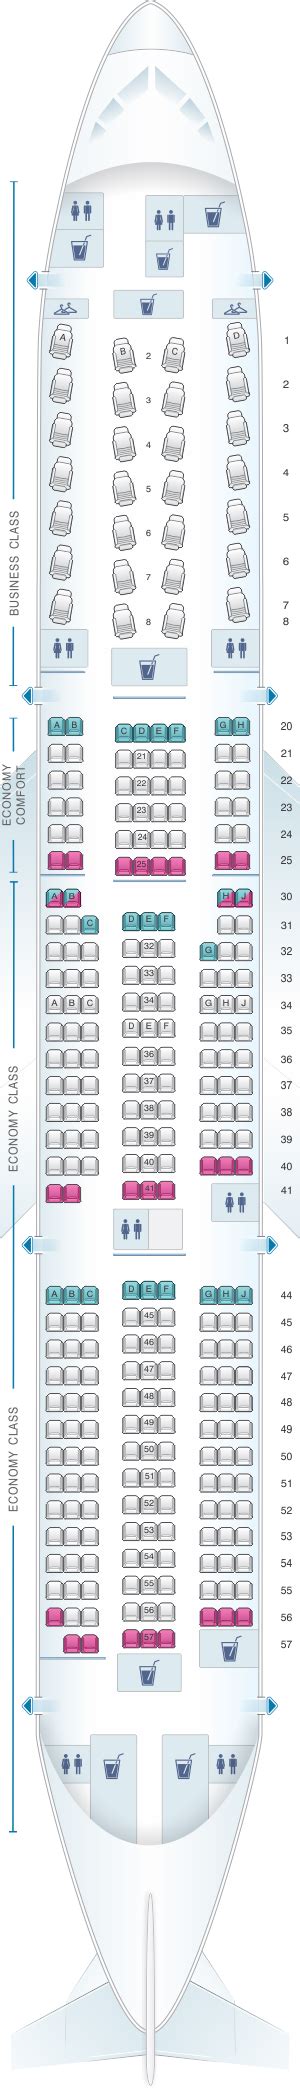 Delta Airlines Seating Chart Boeing 777 Two Birds Home